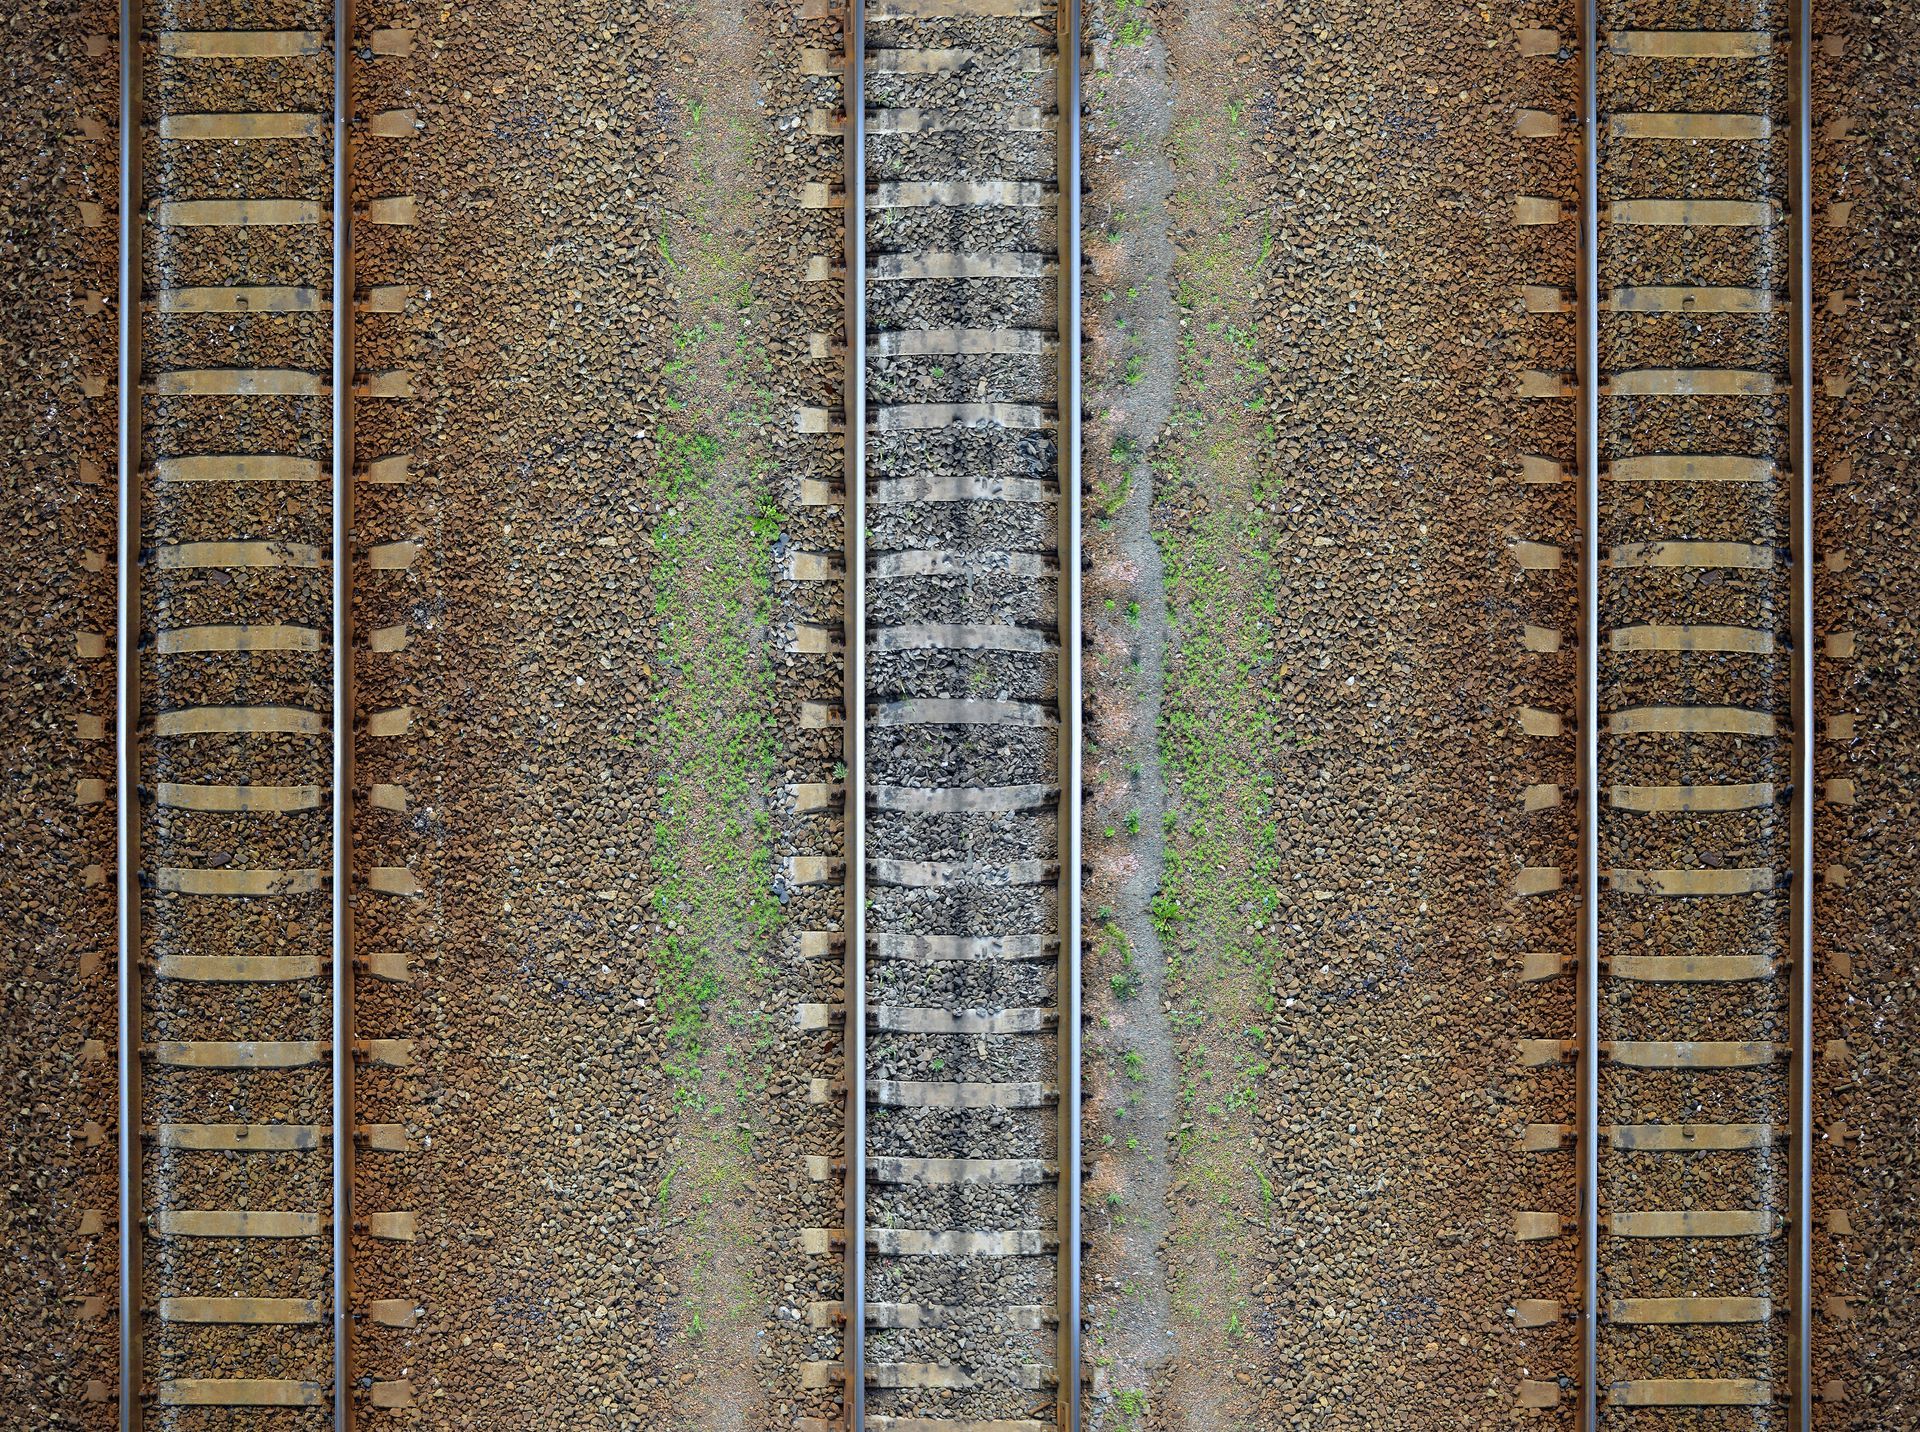 A close up of train tracks on a gravel road.